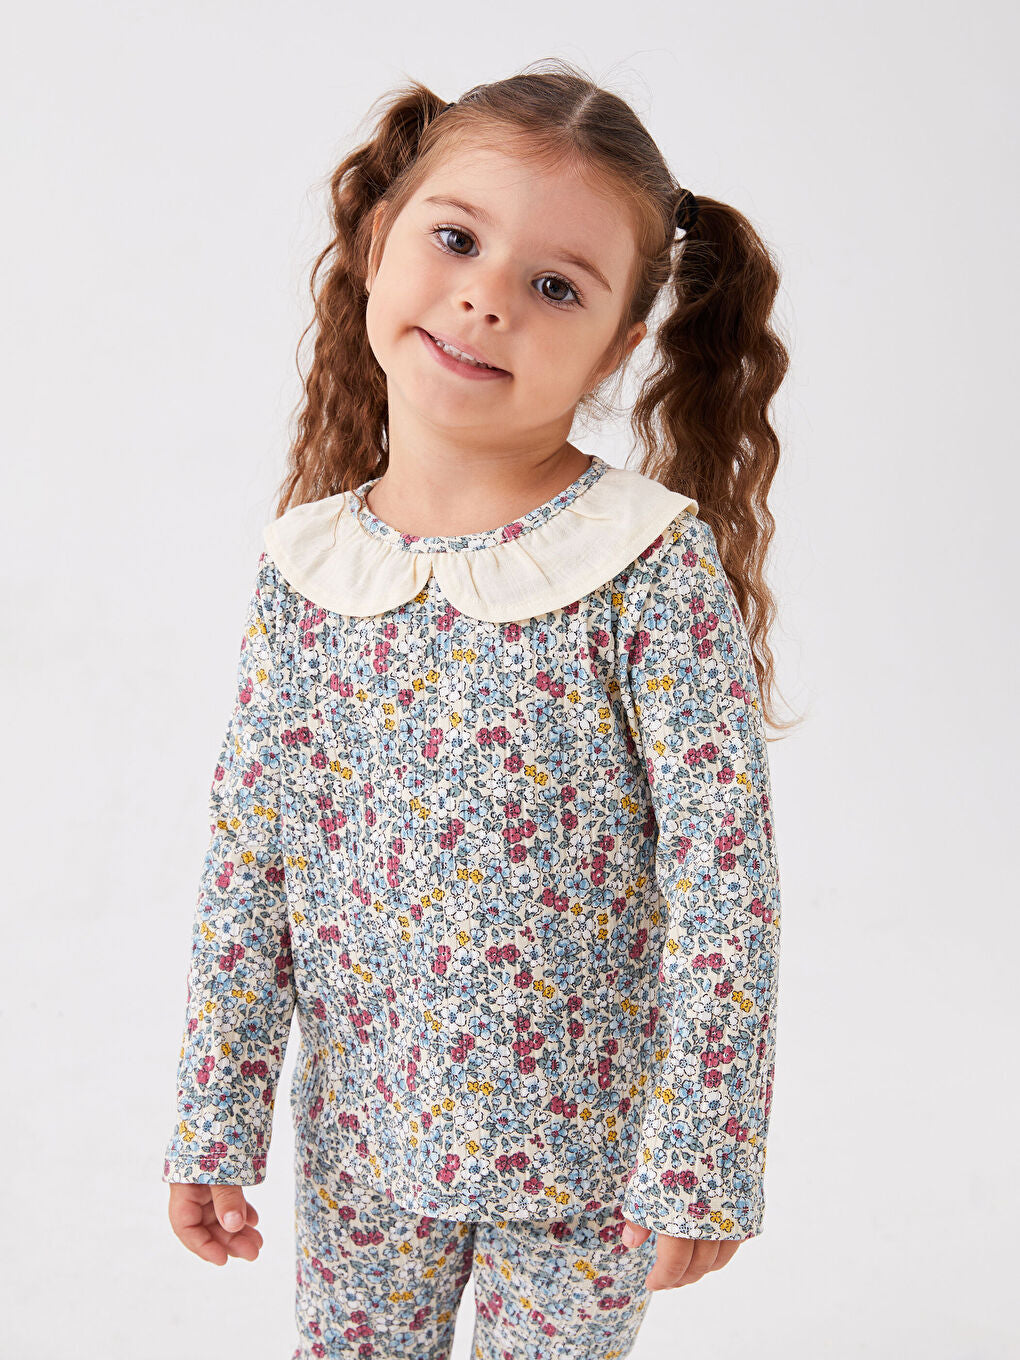 Crew Neck Floral Patterned Baby Girl T-Shirt